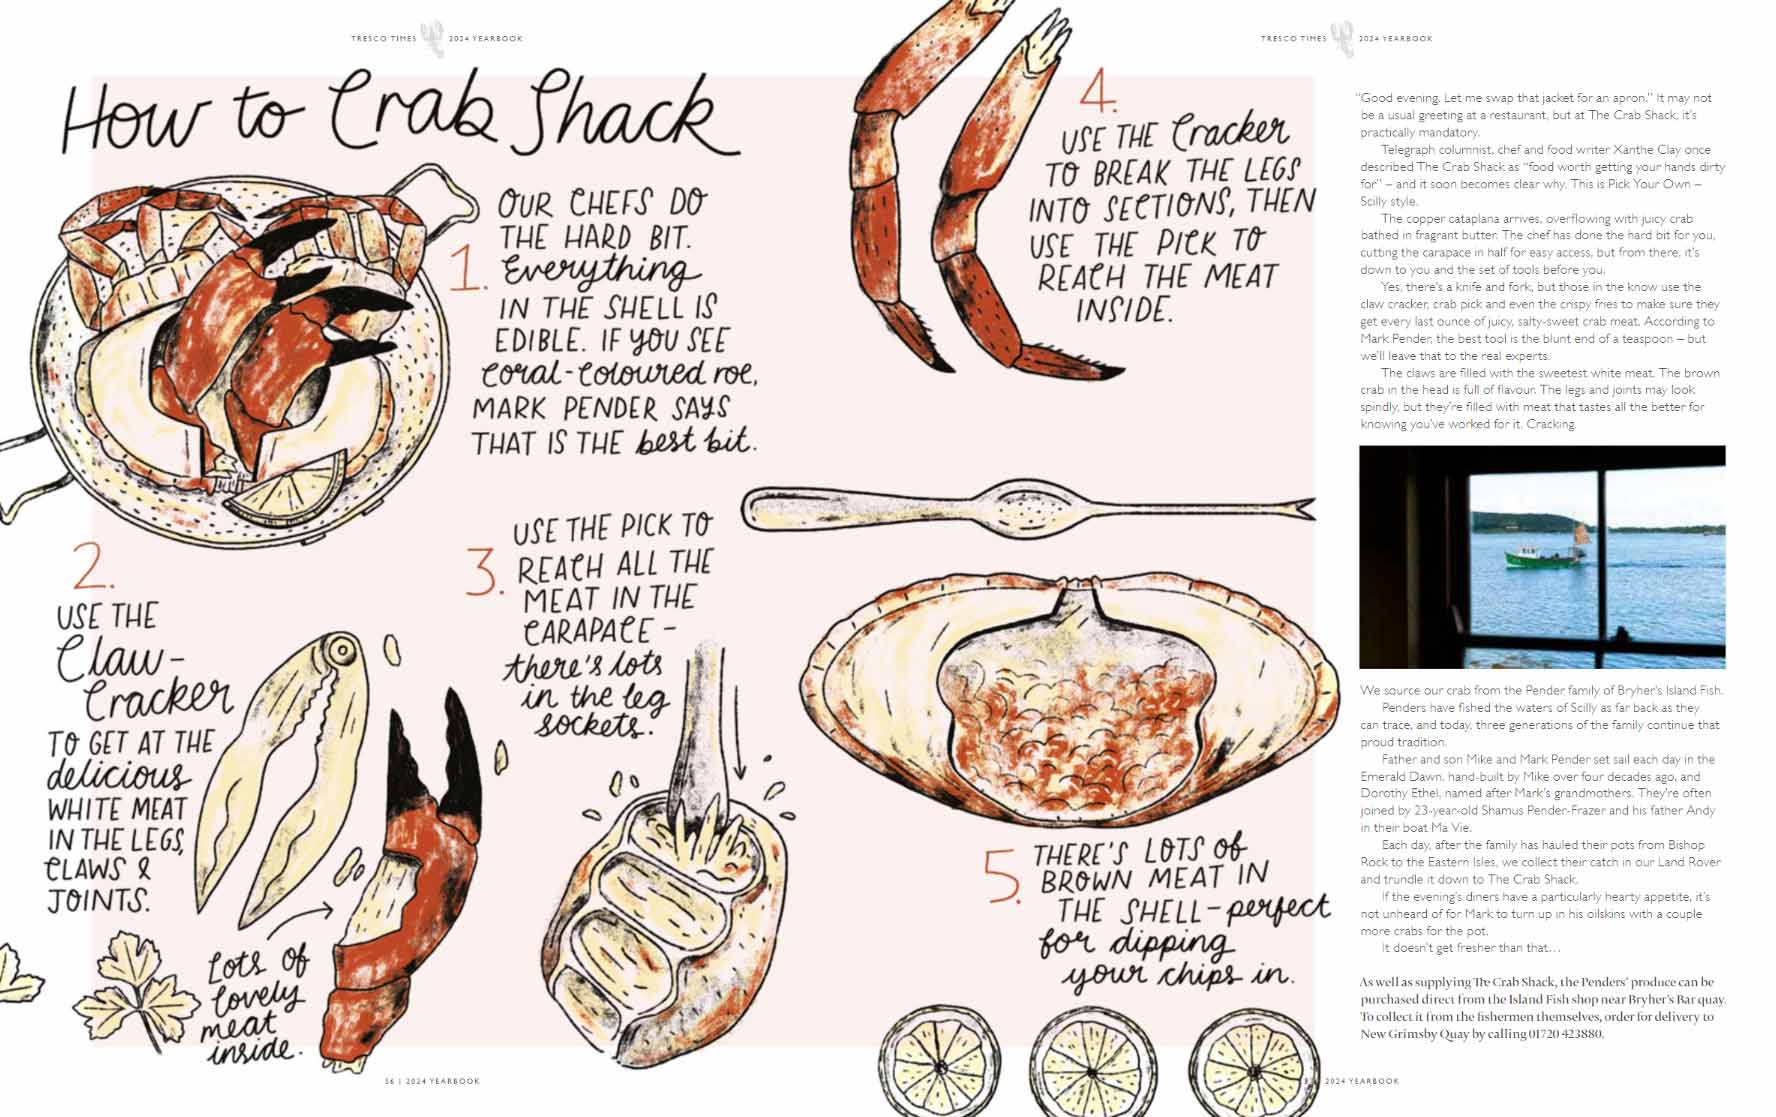 How the final illustration looks in situ; How to dress a crab by Elly Jahnz